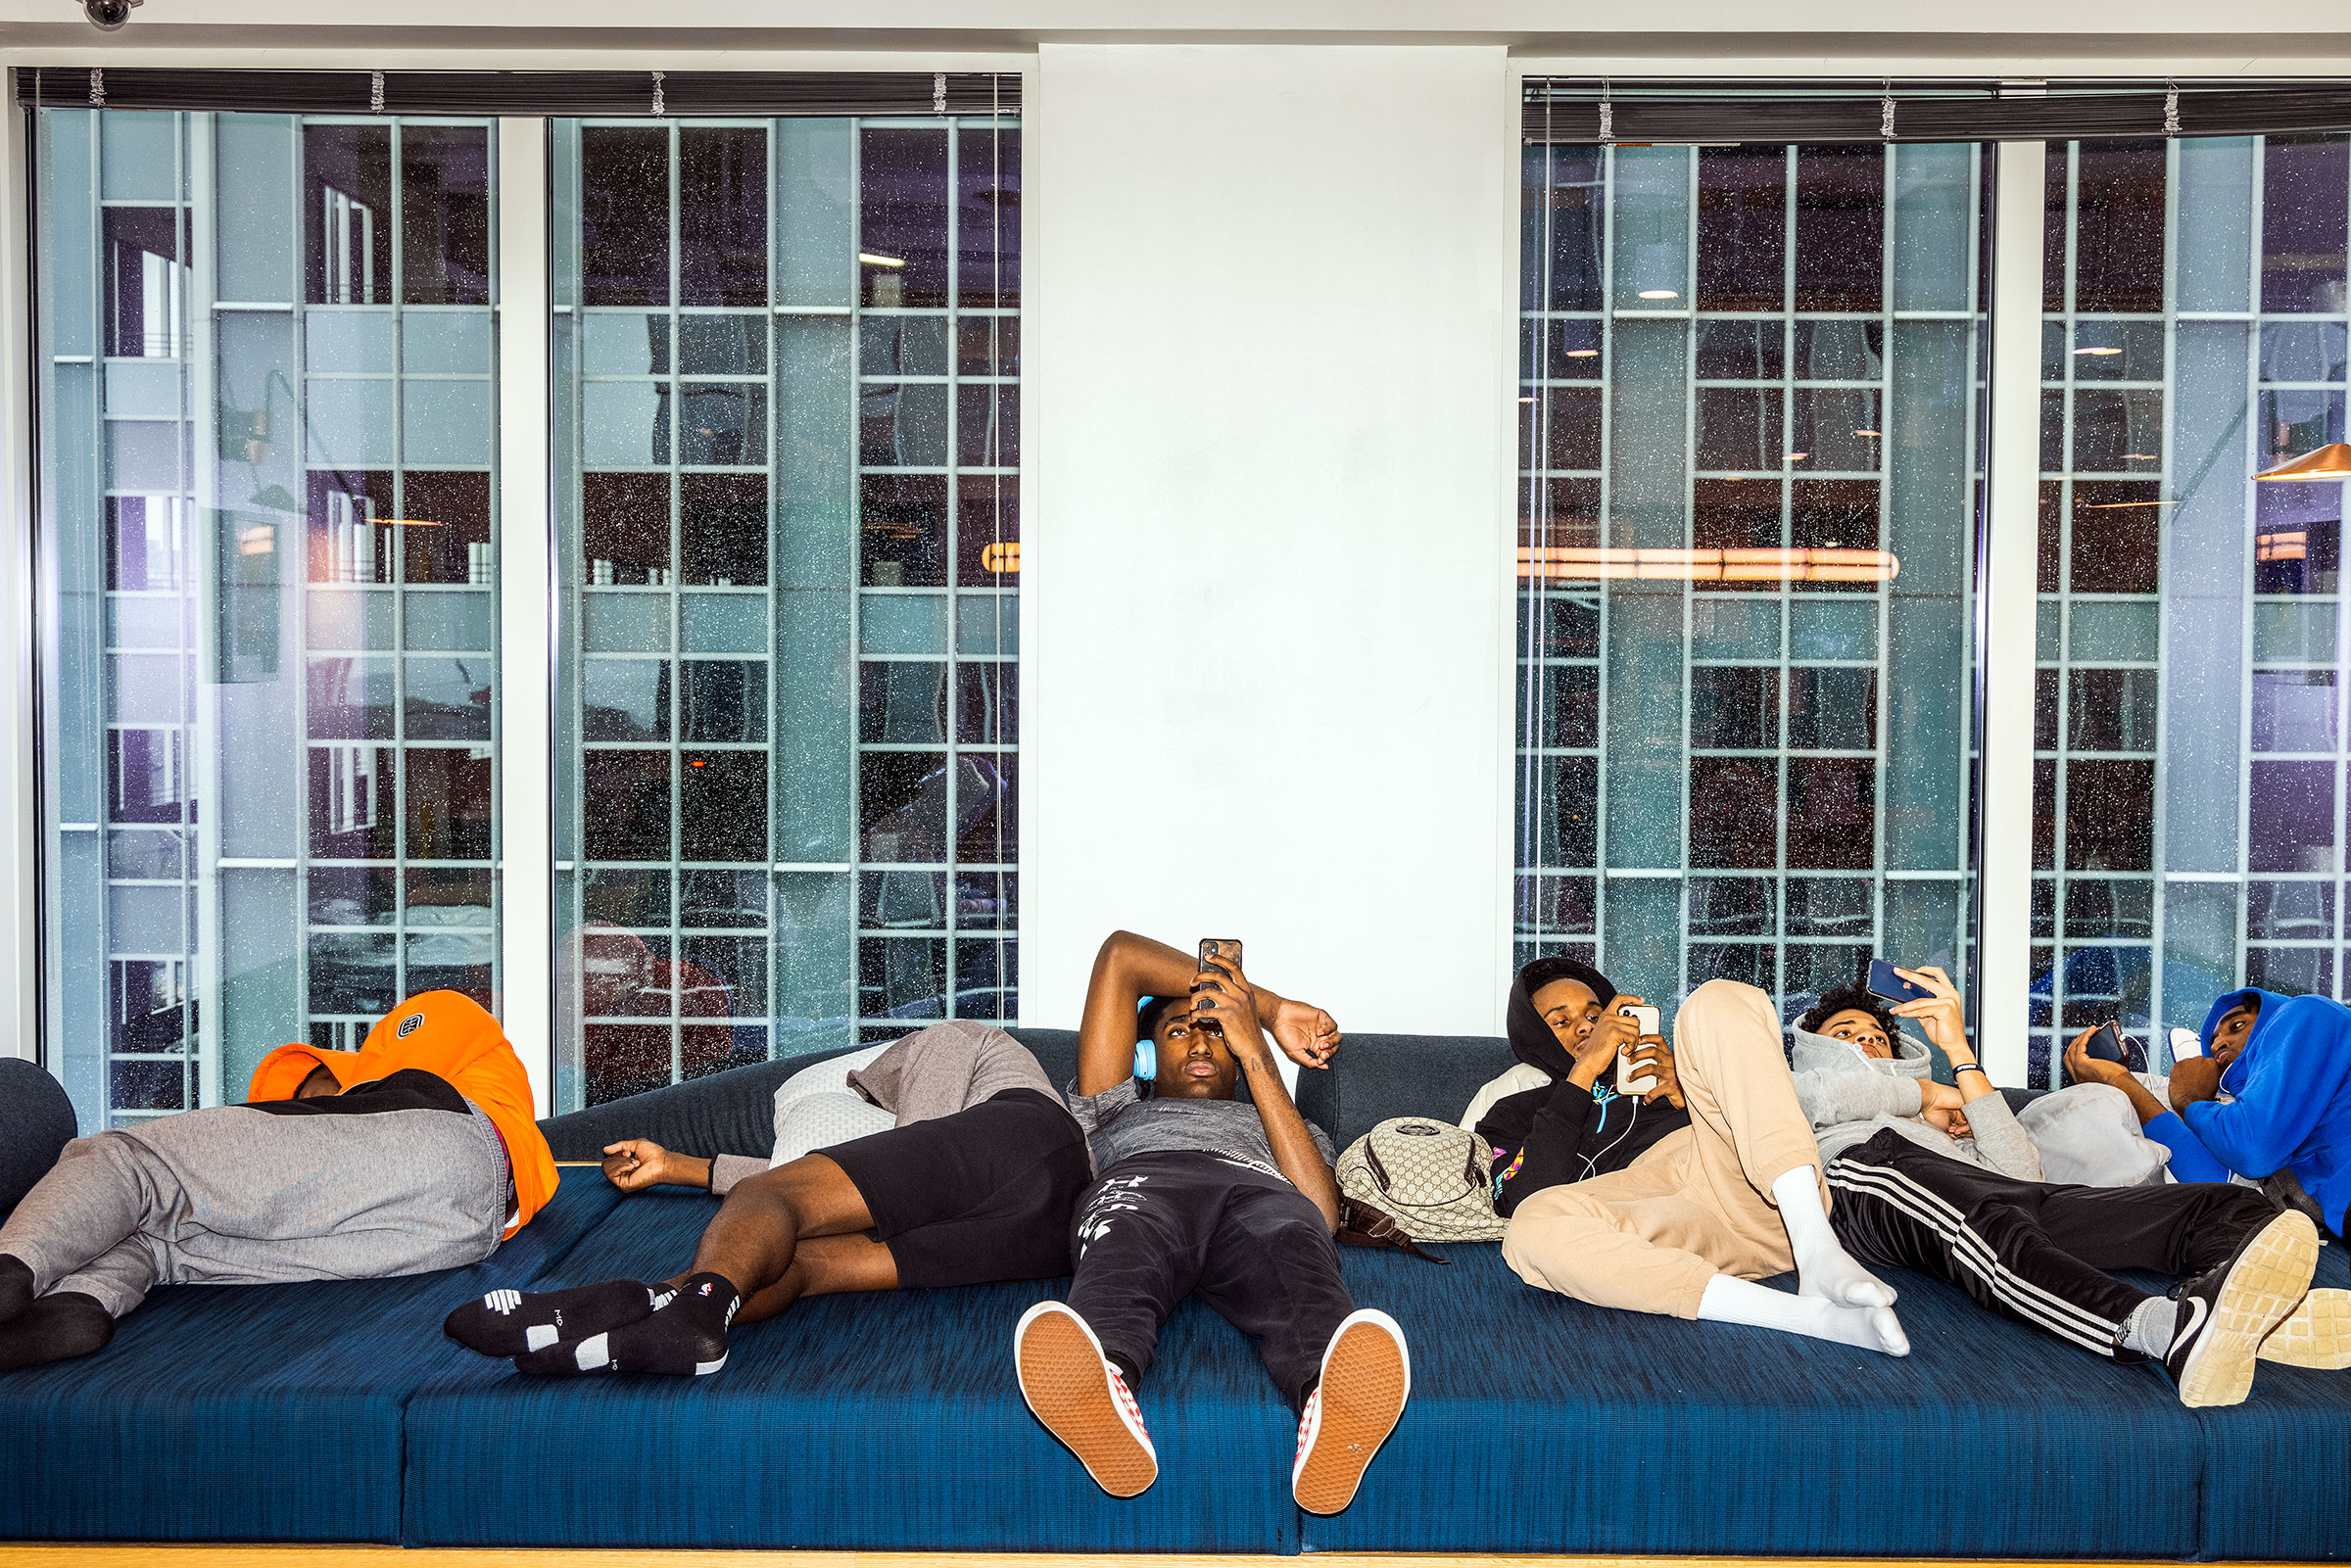 Overtime Elite players relax between classes at the WeWork space. (Andrew Hetherington for TIME)